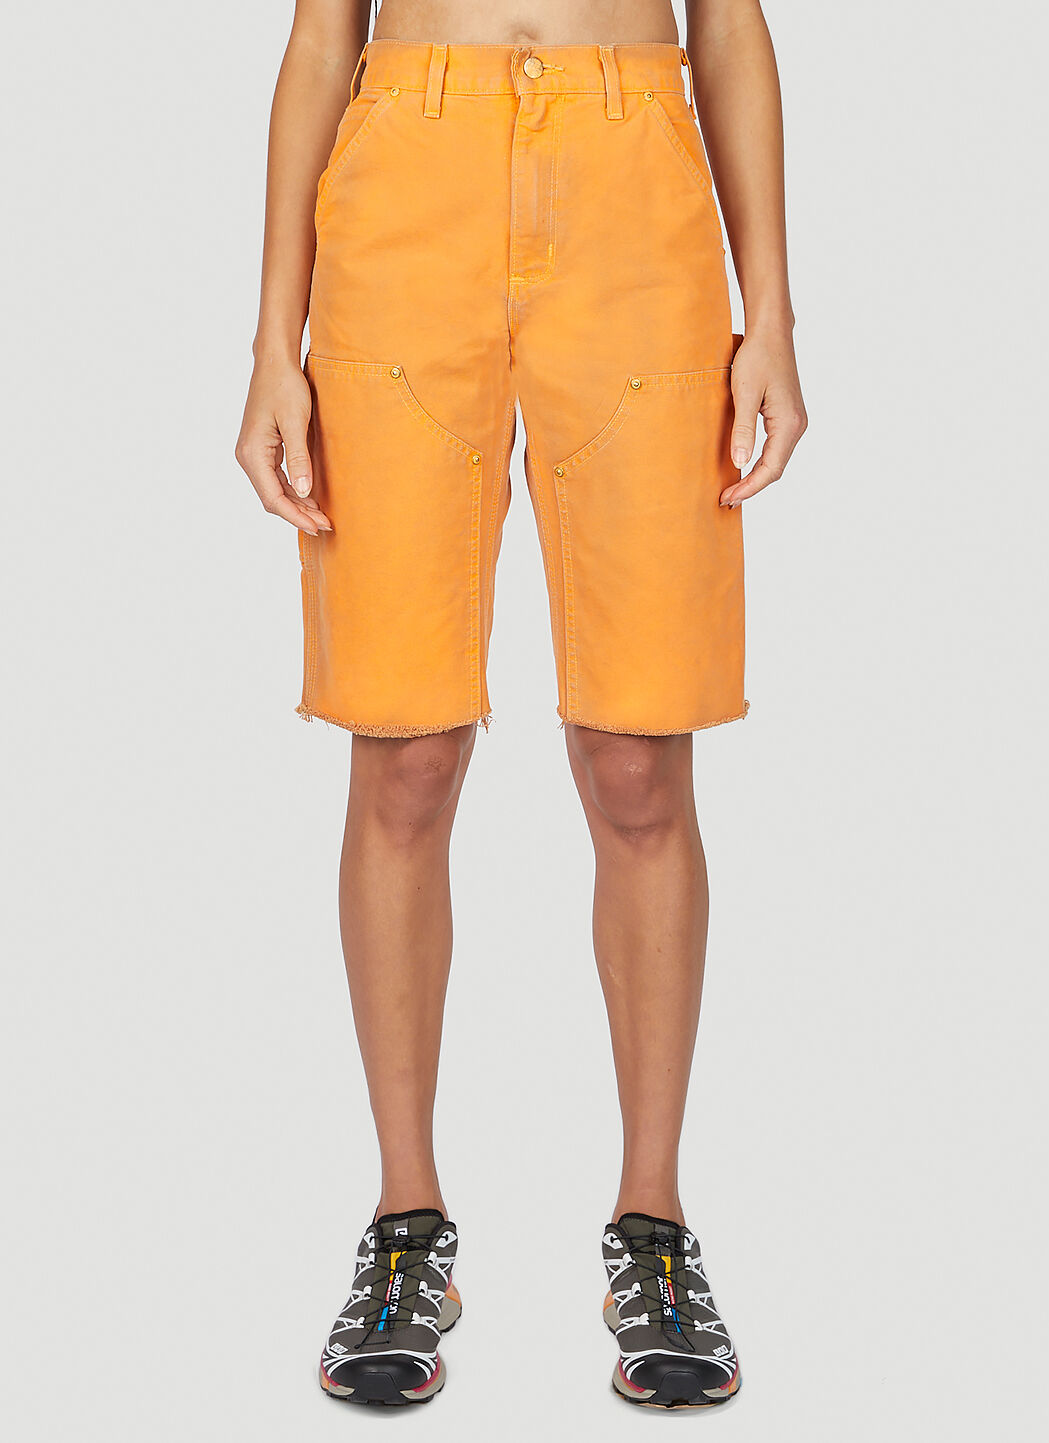 NOTSONORMAL Washed Working Shorts Yellow nsm0348025